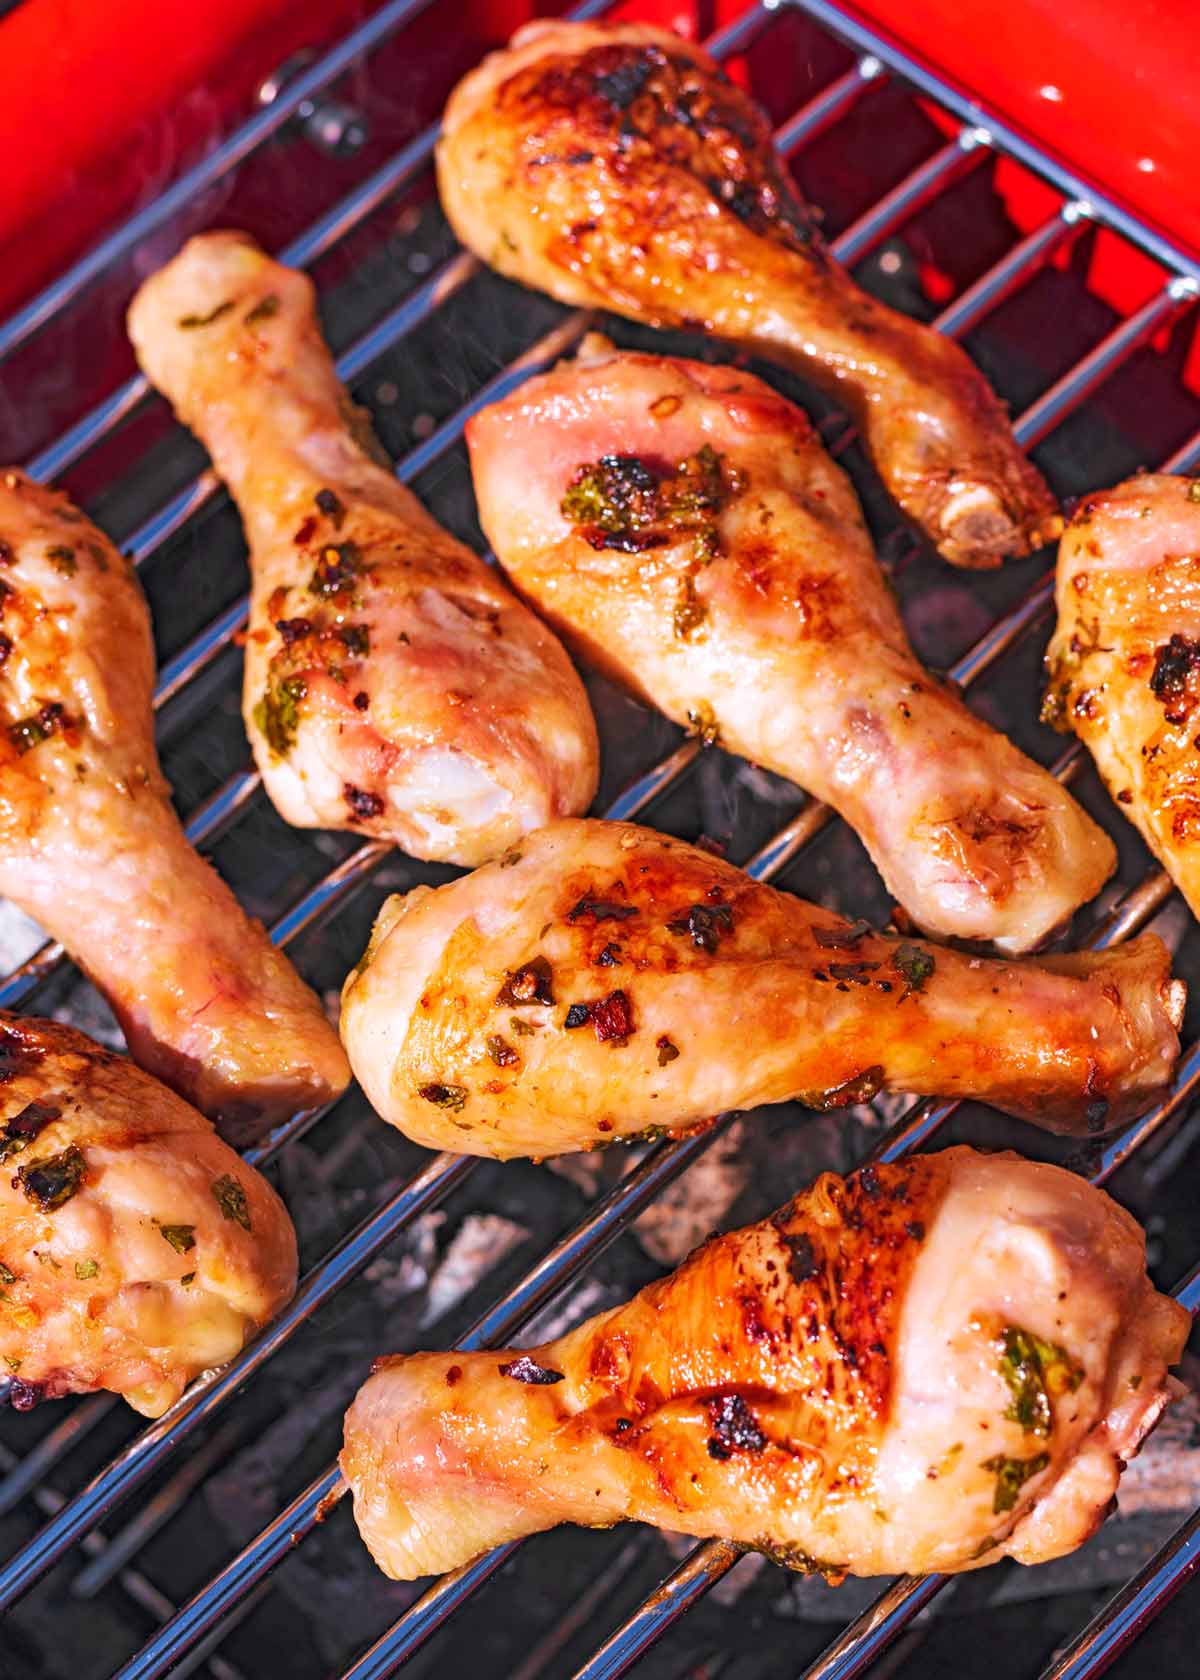 Chicken drumsticks cooking on a barbecue grill.